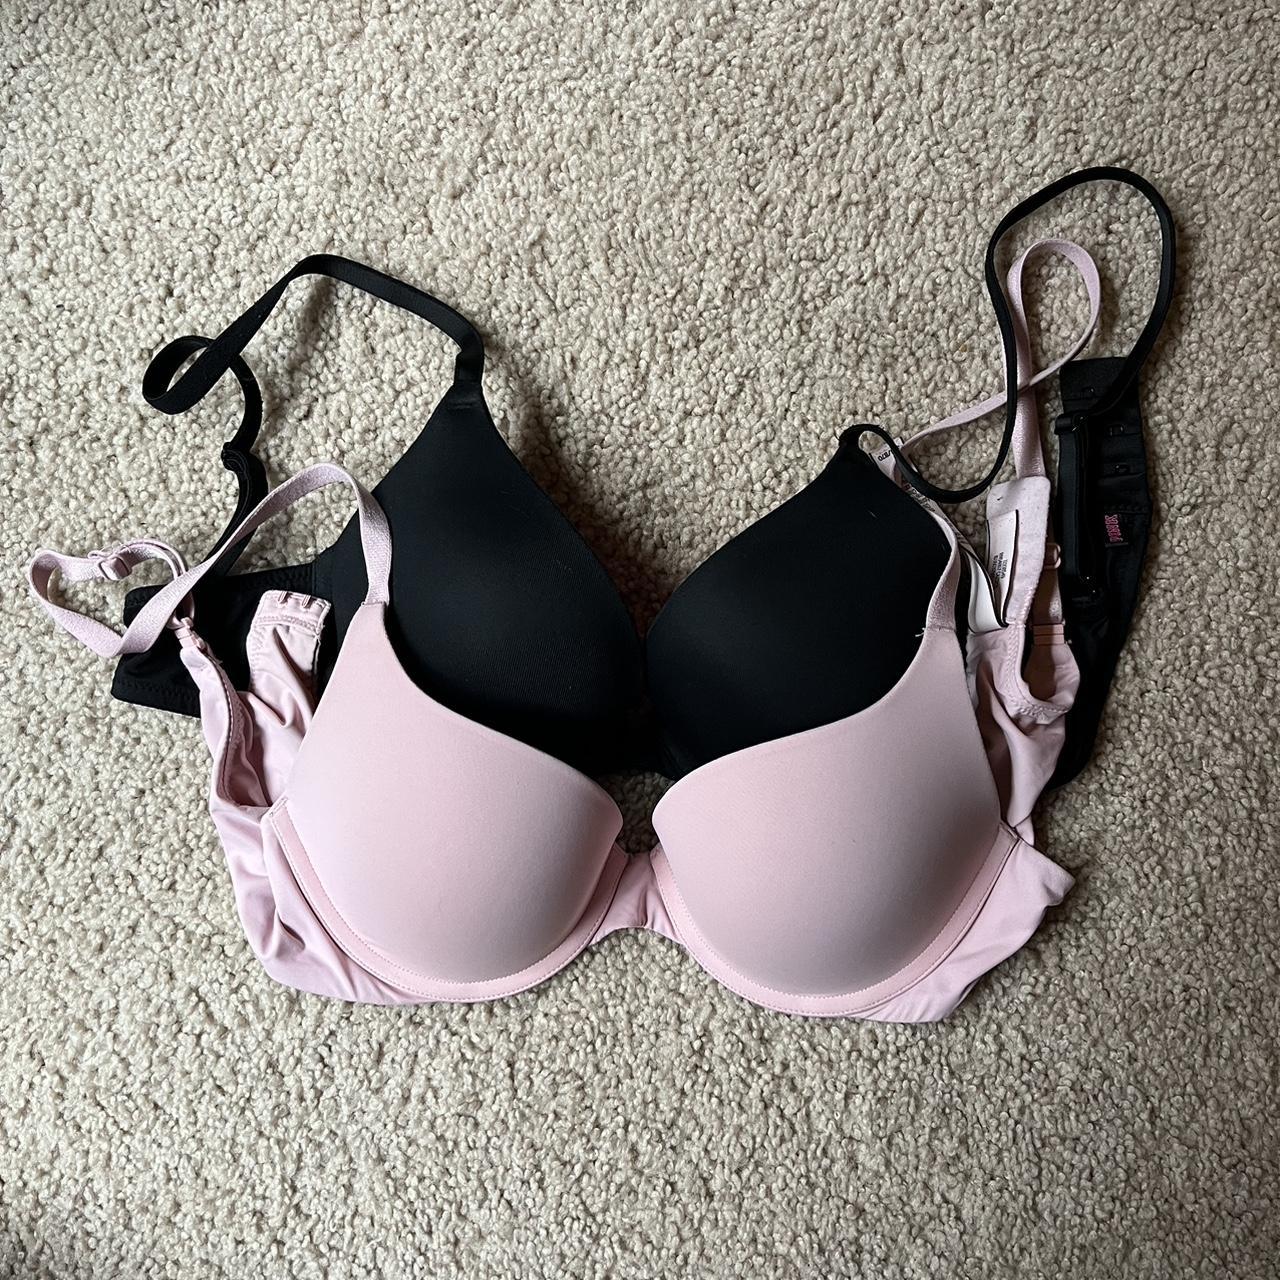 32B Pink Everyday Push Up Bra Bundle Comes with - Depop